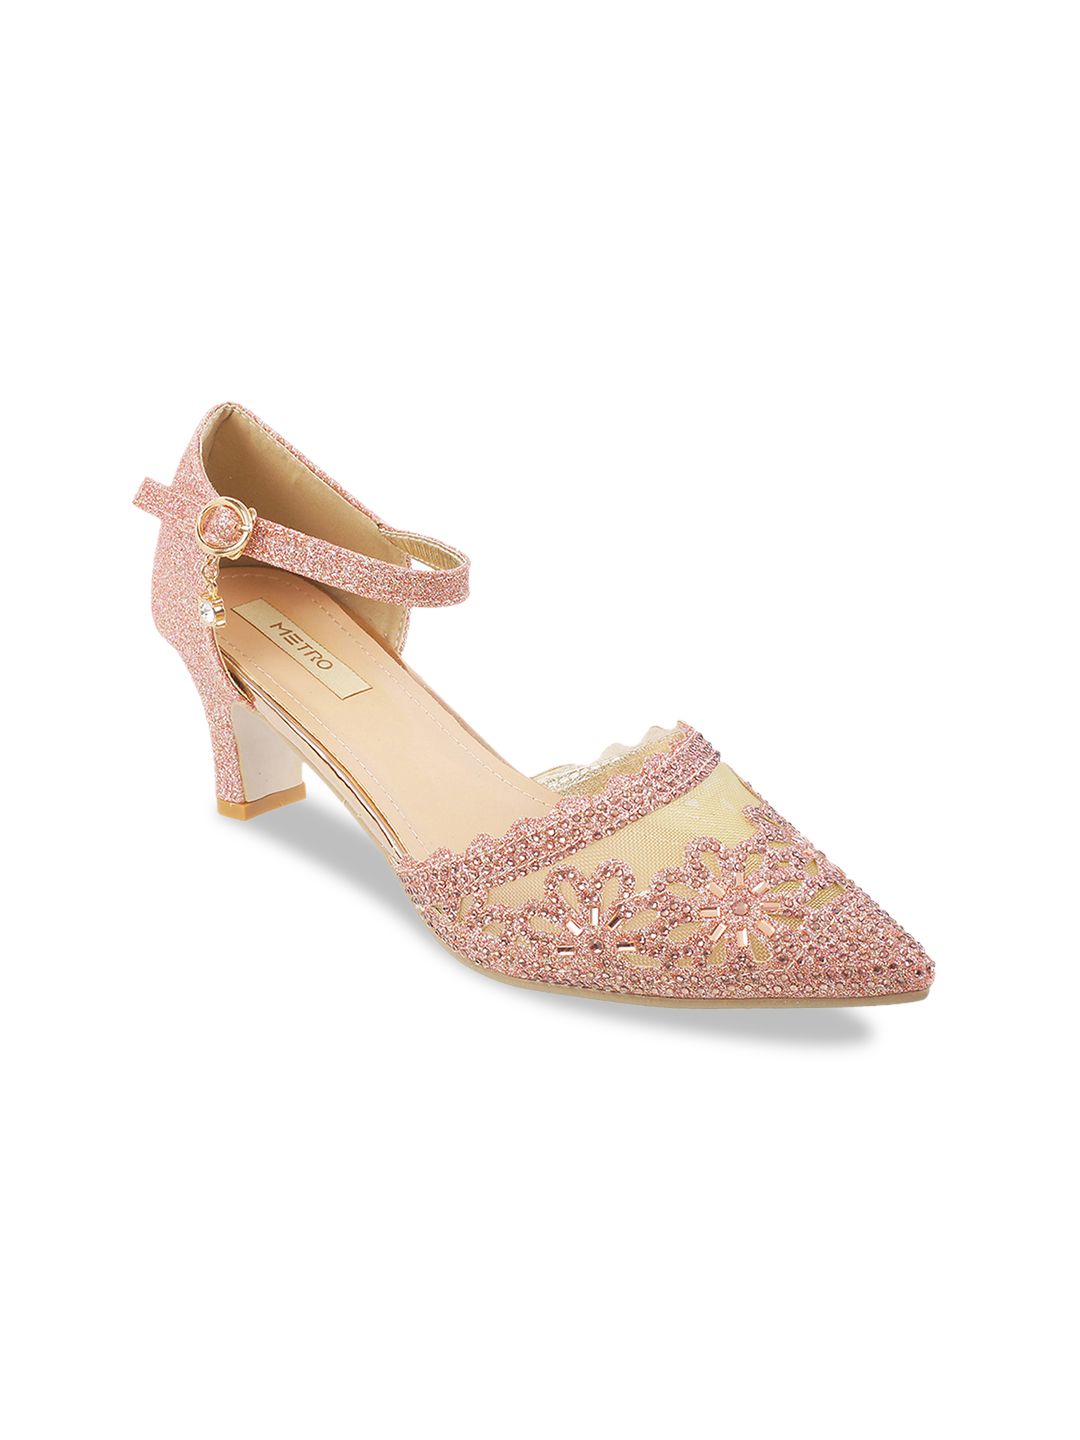 Metro Women Gold-Toned & Pink Embellished Pumps Price in India